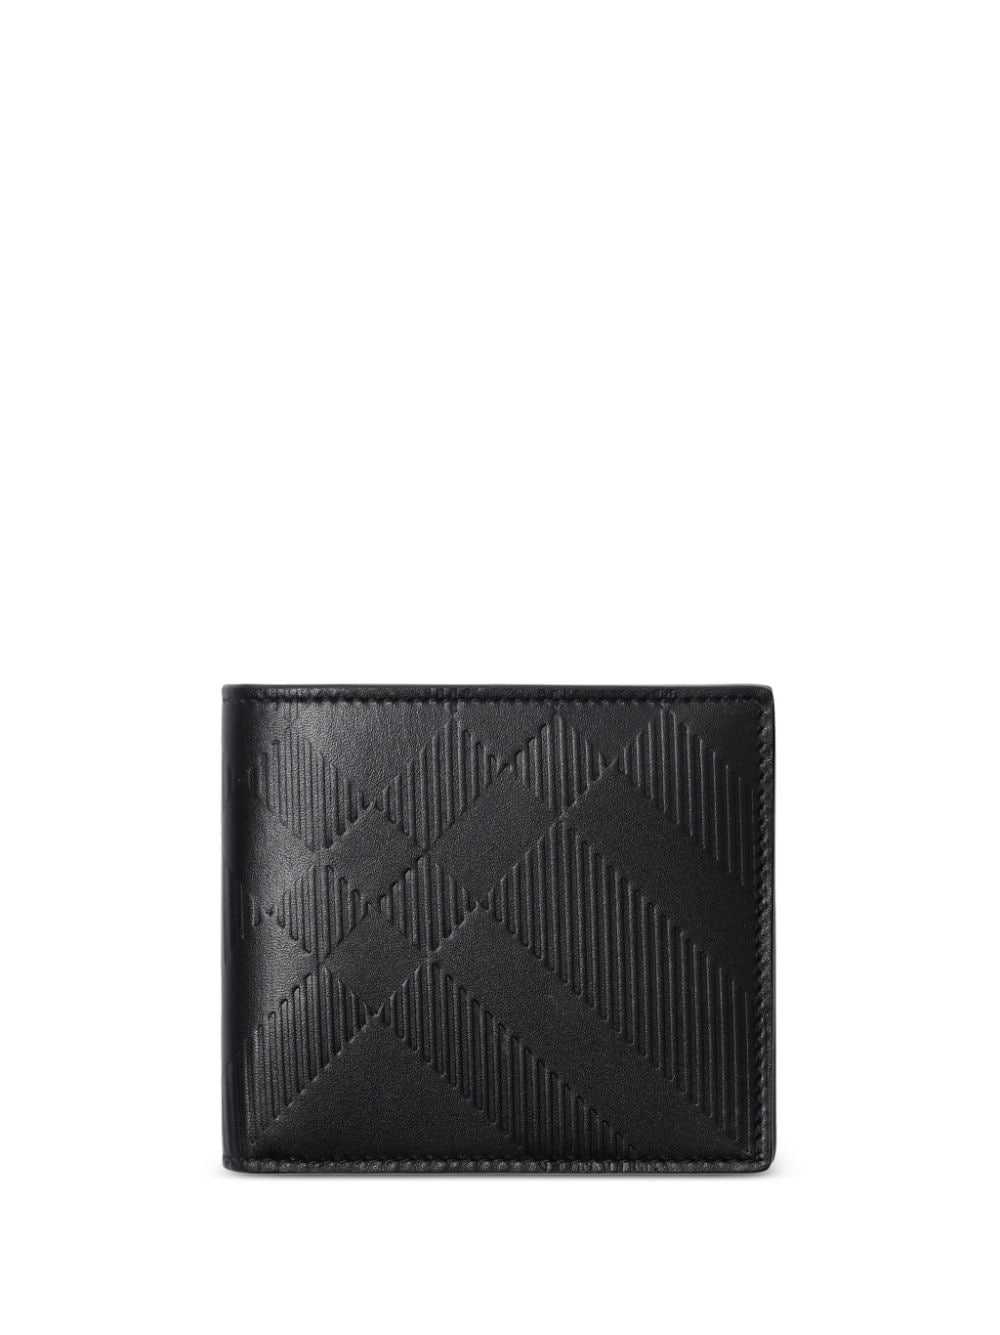 embossed-check leather wallet - 1